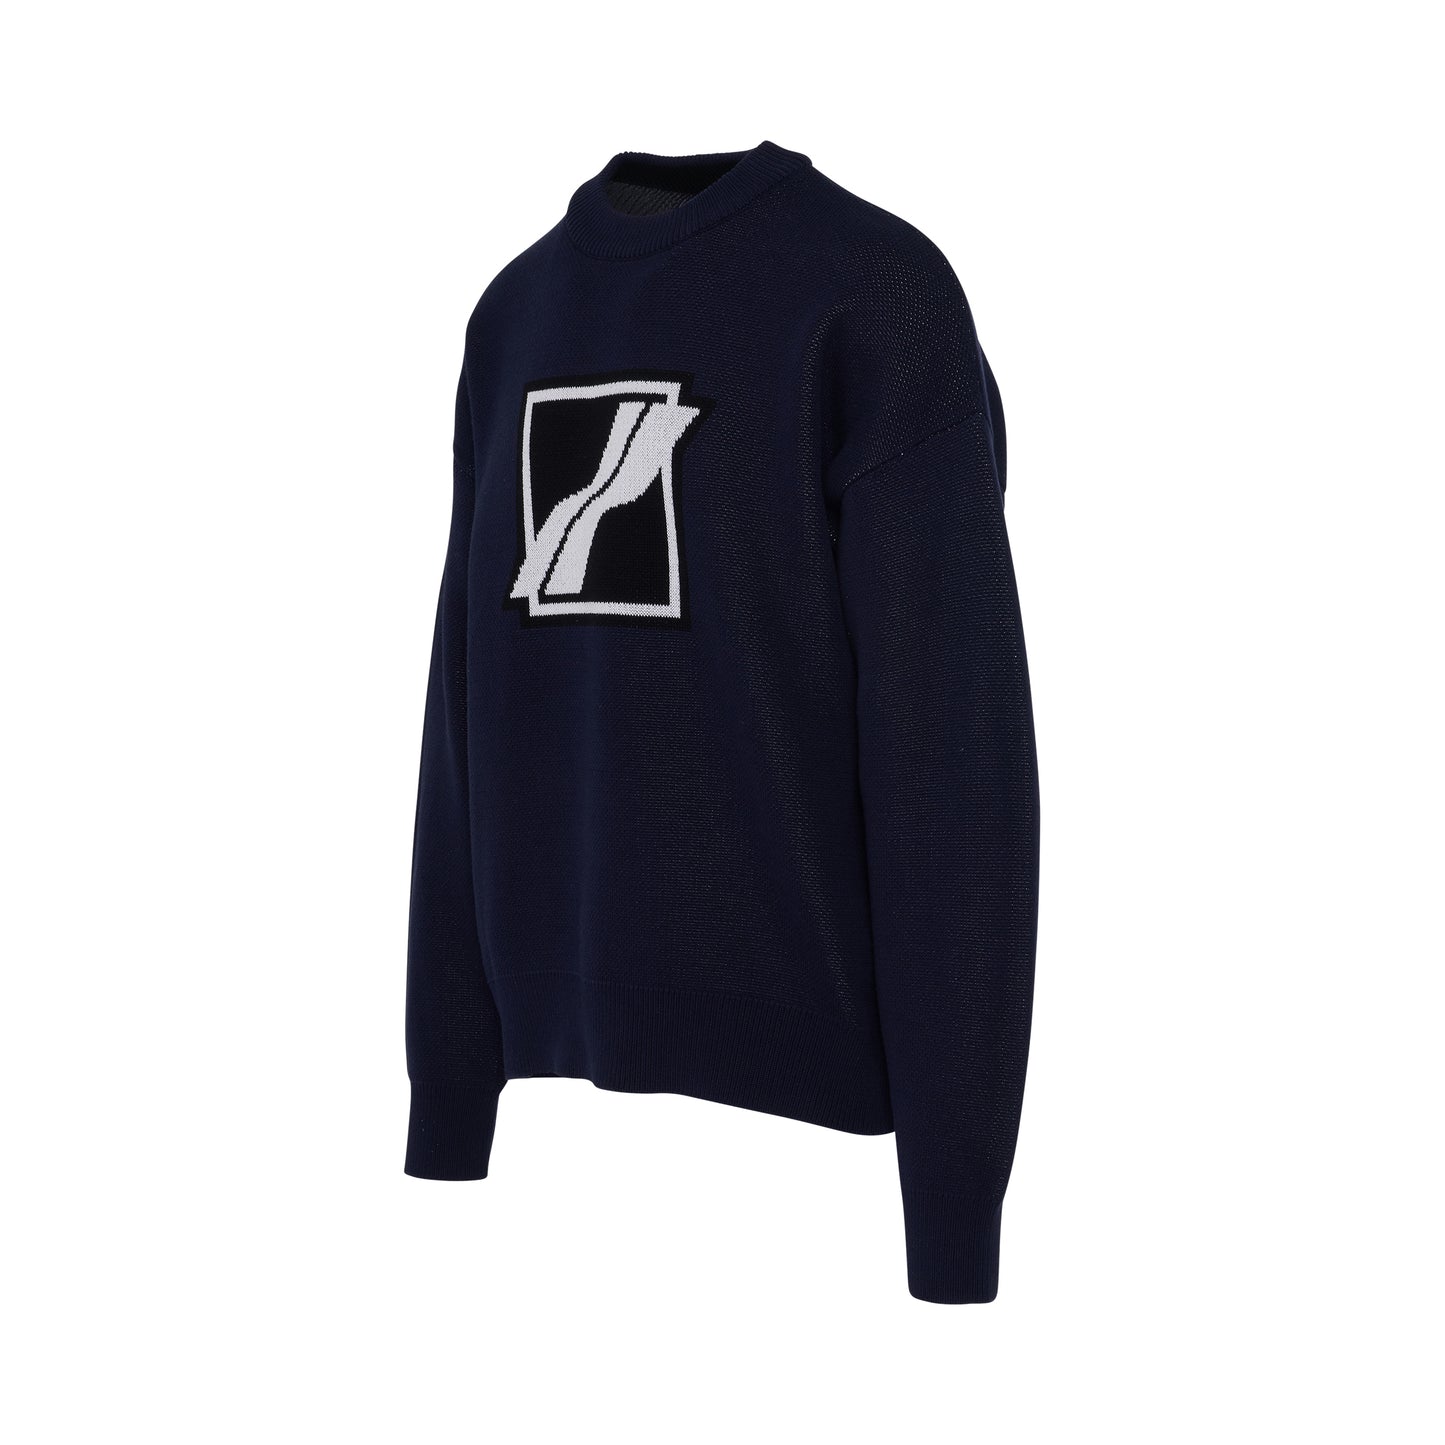 Square Logo Jacquard Knit Sweater in Navy